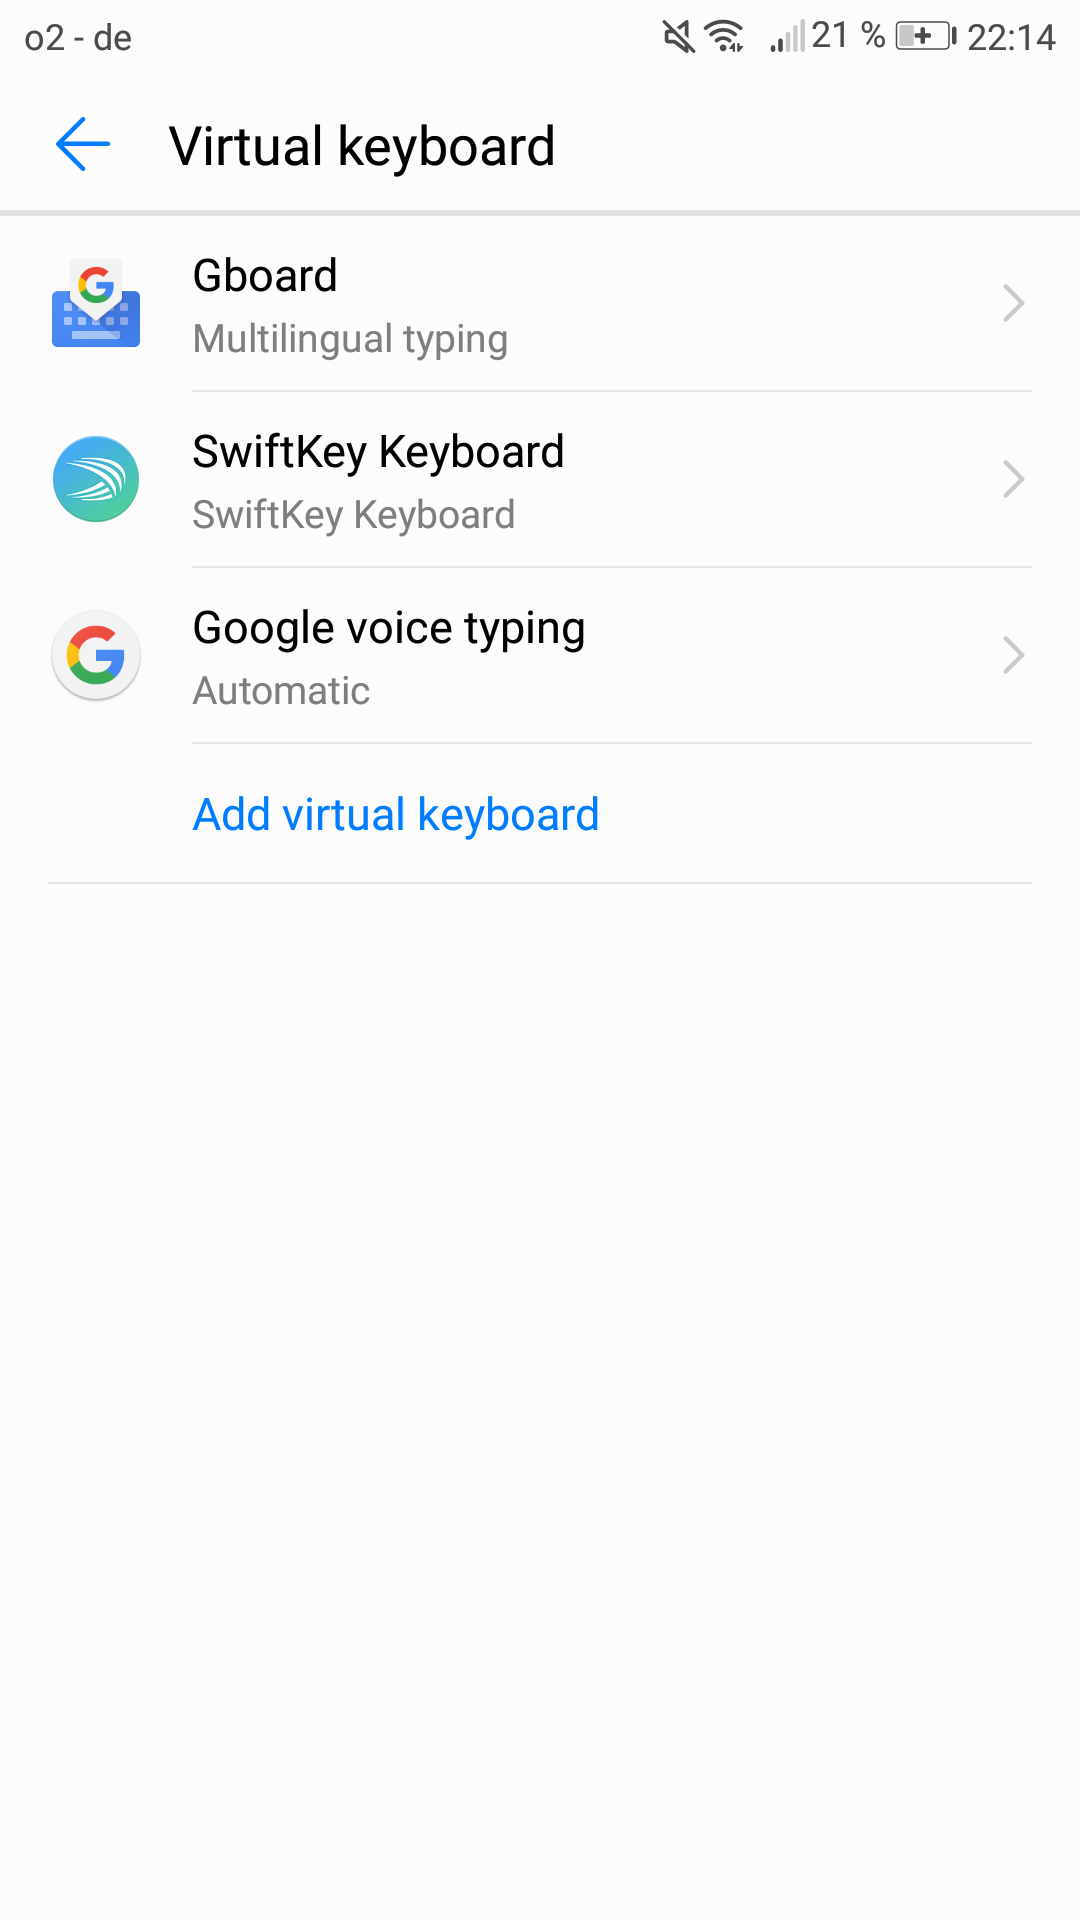 Android keyboard settings